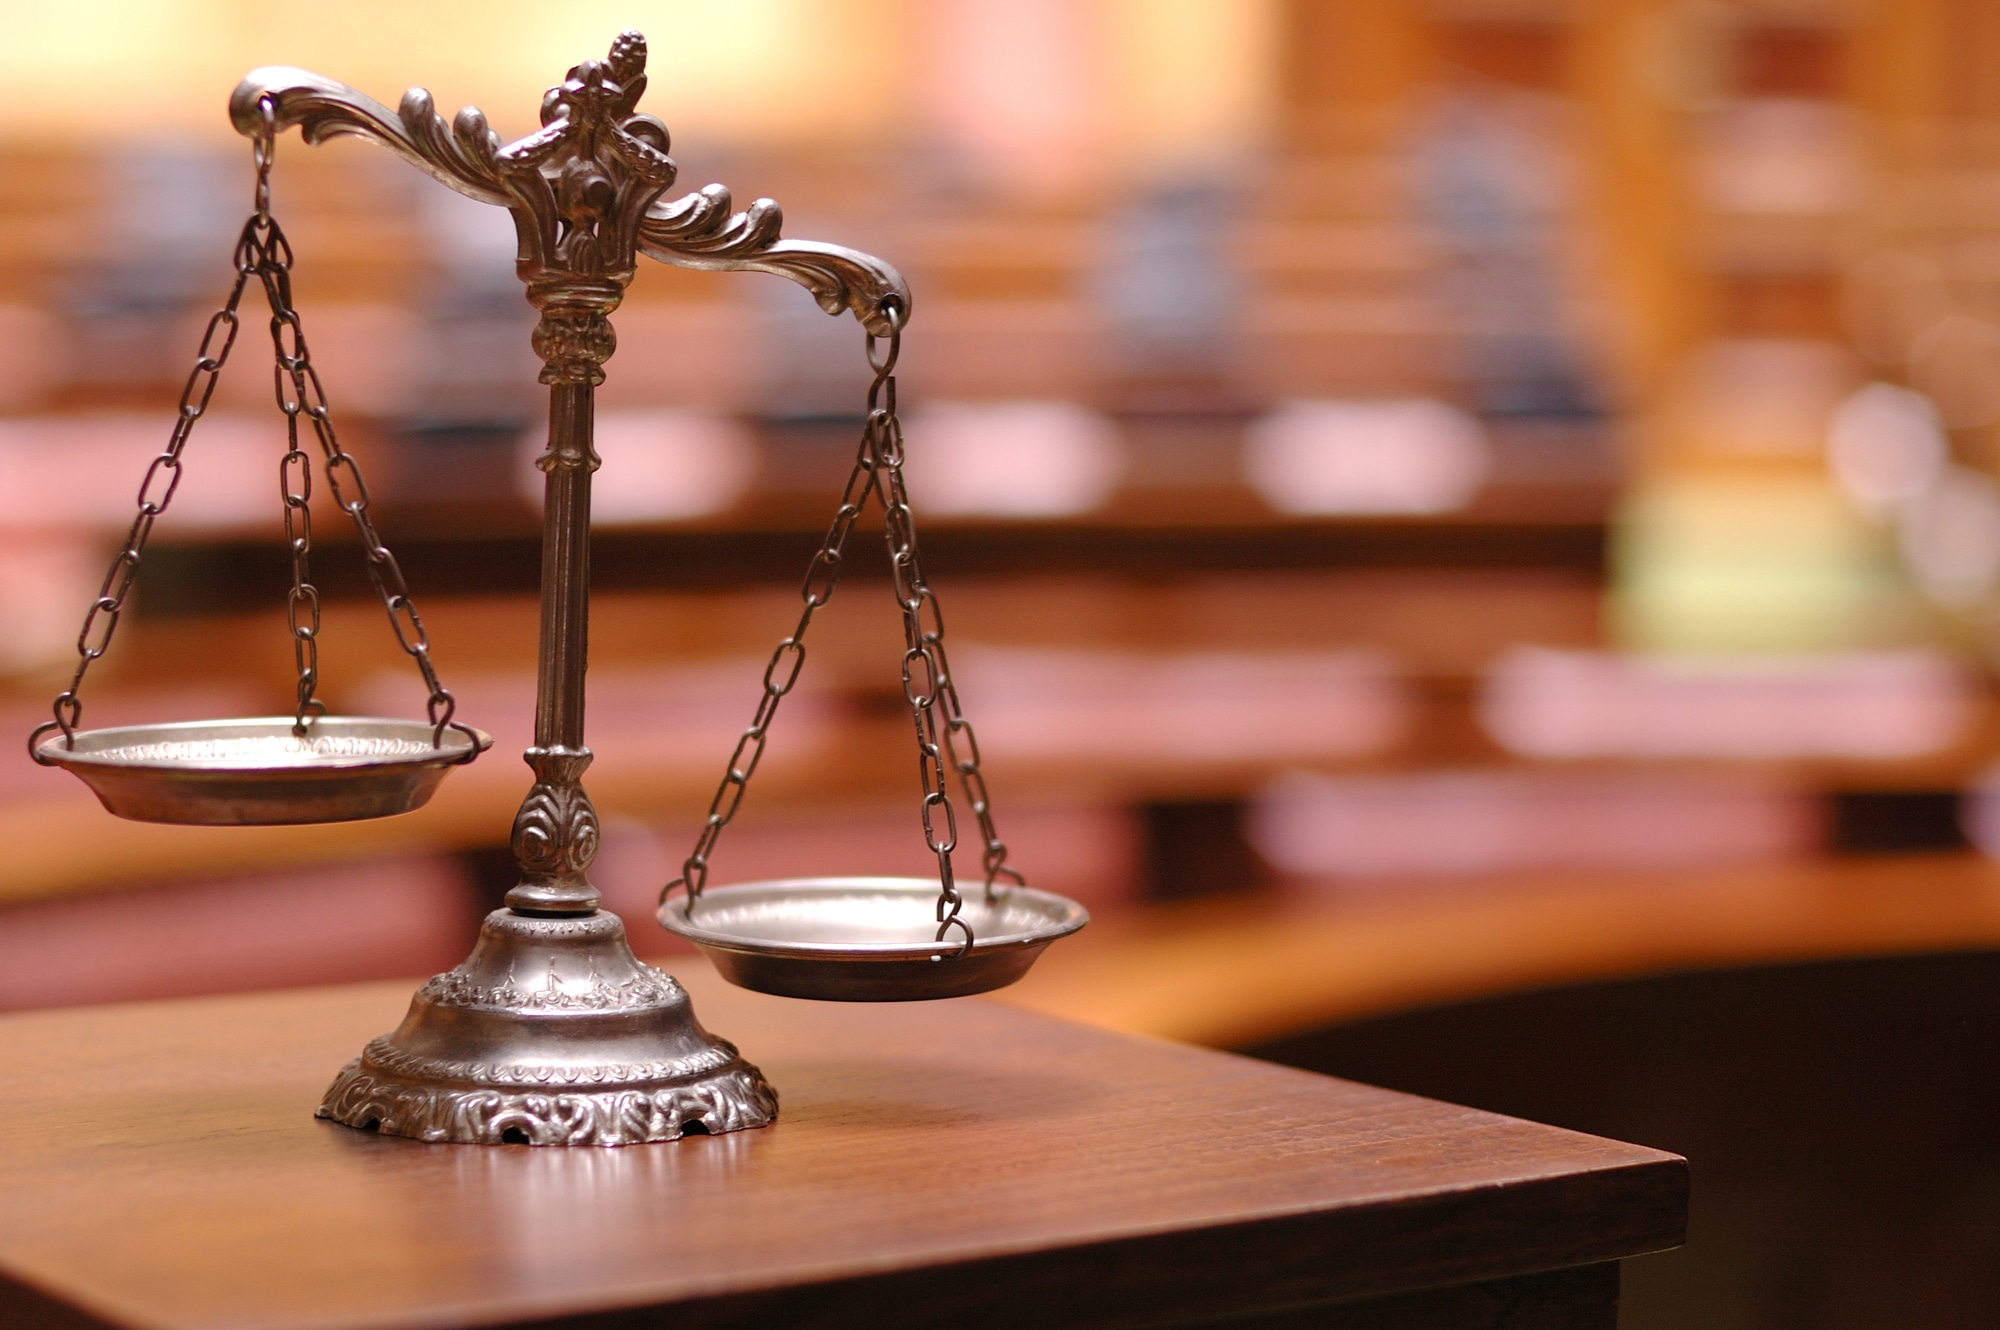 scales of justice against blurred background of courtroom